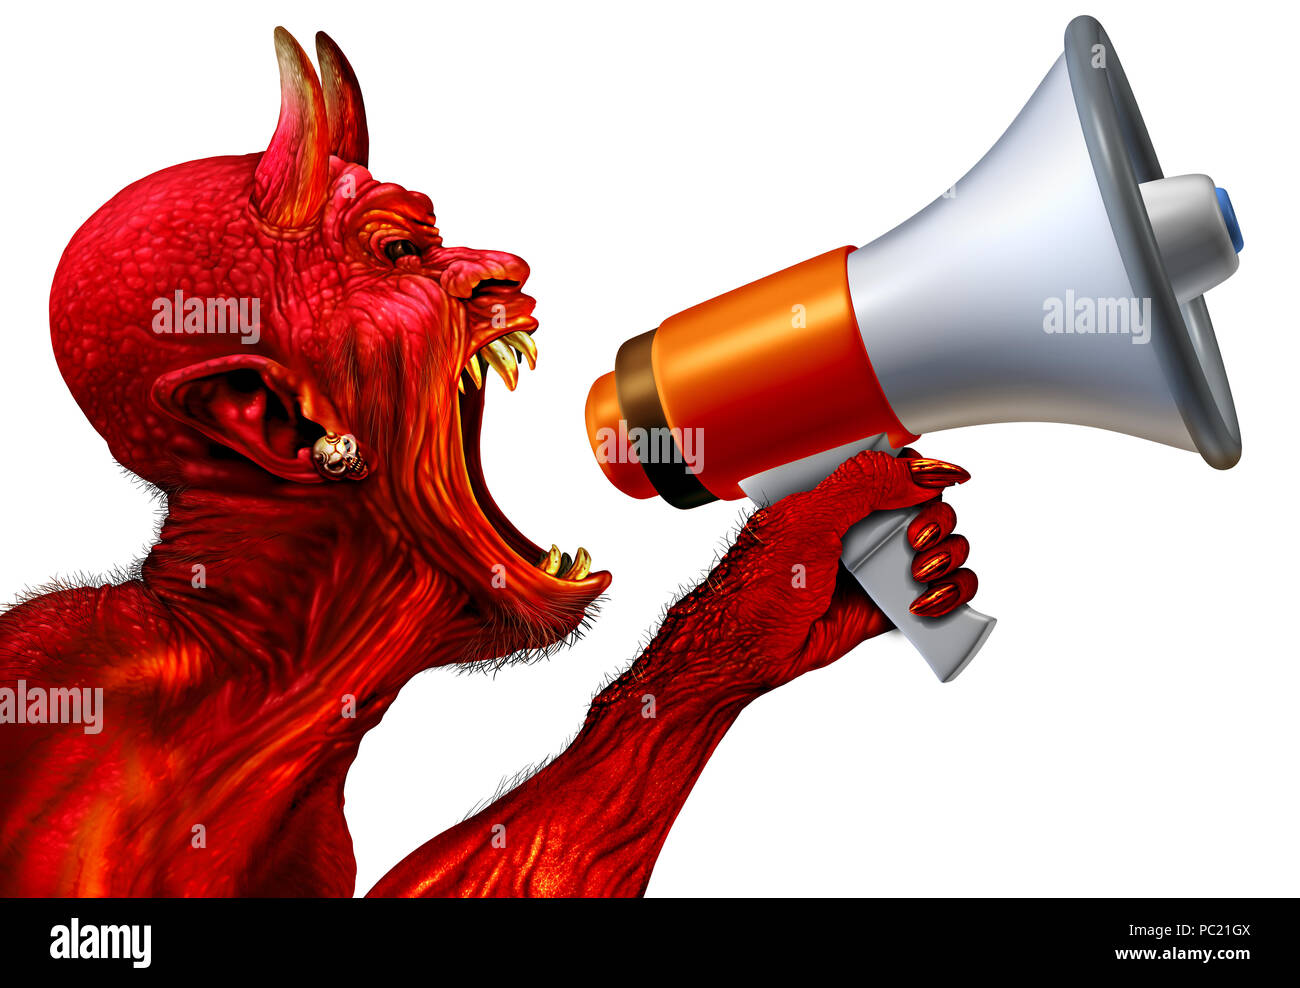 Demon announcement concept as a red devil monster holding a bullhorn or megaphone to announce news or promote halloween marketing and promotion. Stock Photo